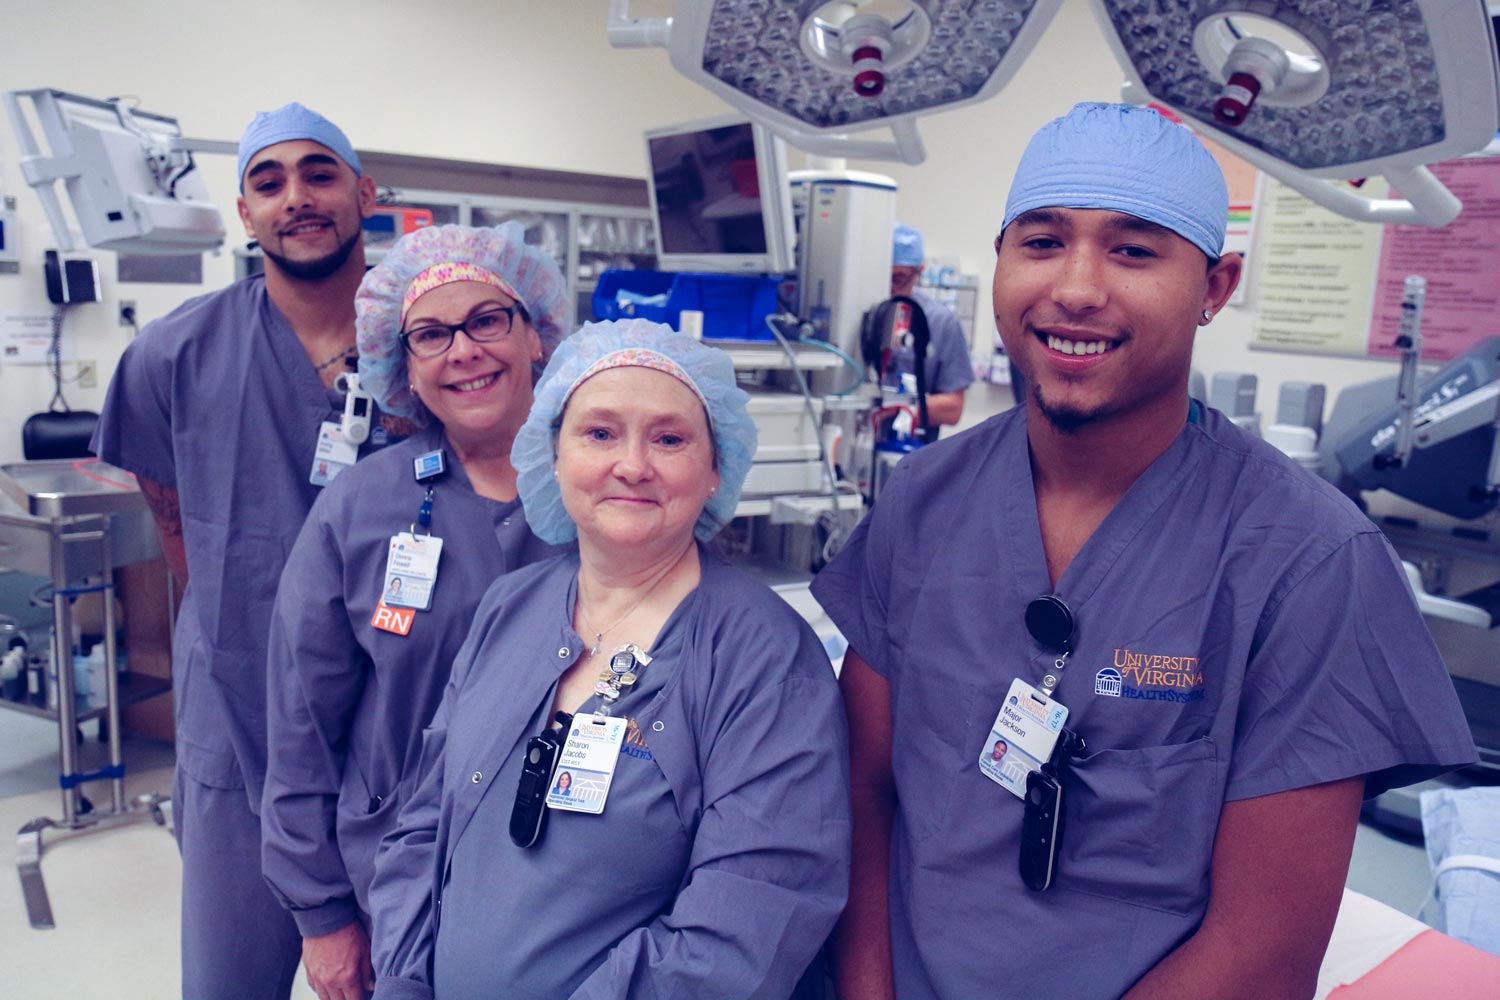 Surgery team: Irving Miller, Donna Fewell, Sharon Jacobs and Major Jackson stand together and smiles at the camera